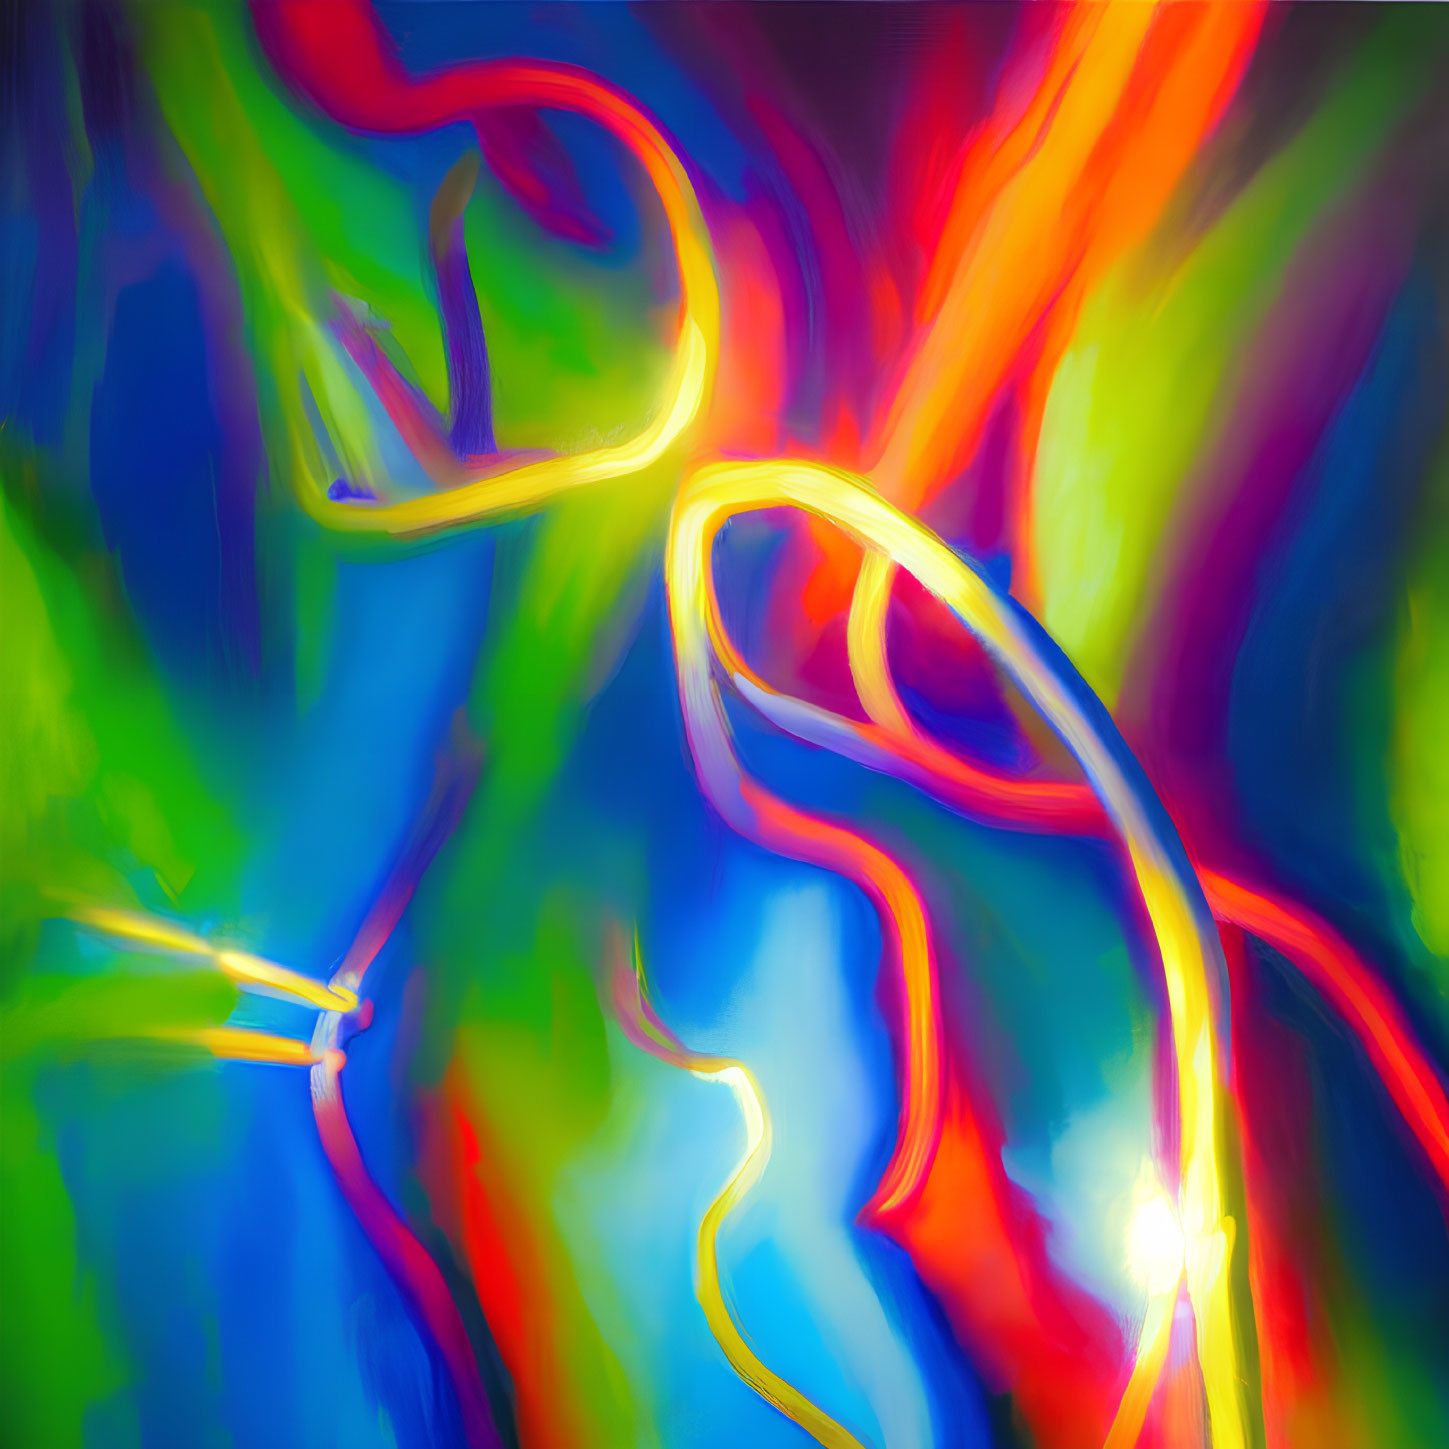 Colorful Abstract Swirls: Blue, Green, Red, Yellow & Neon Effects